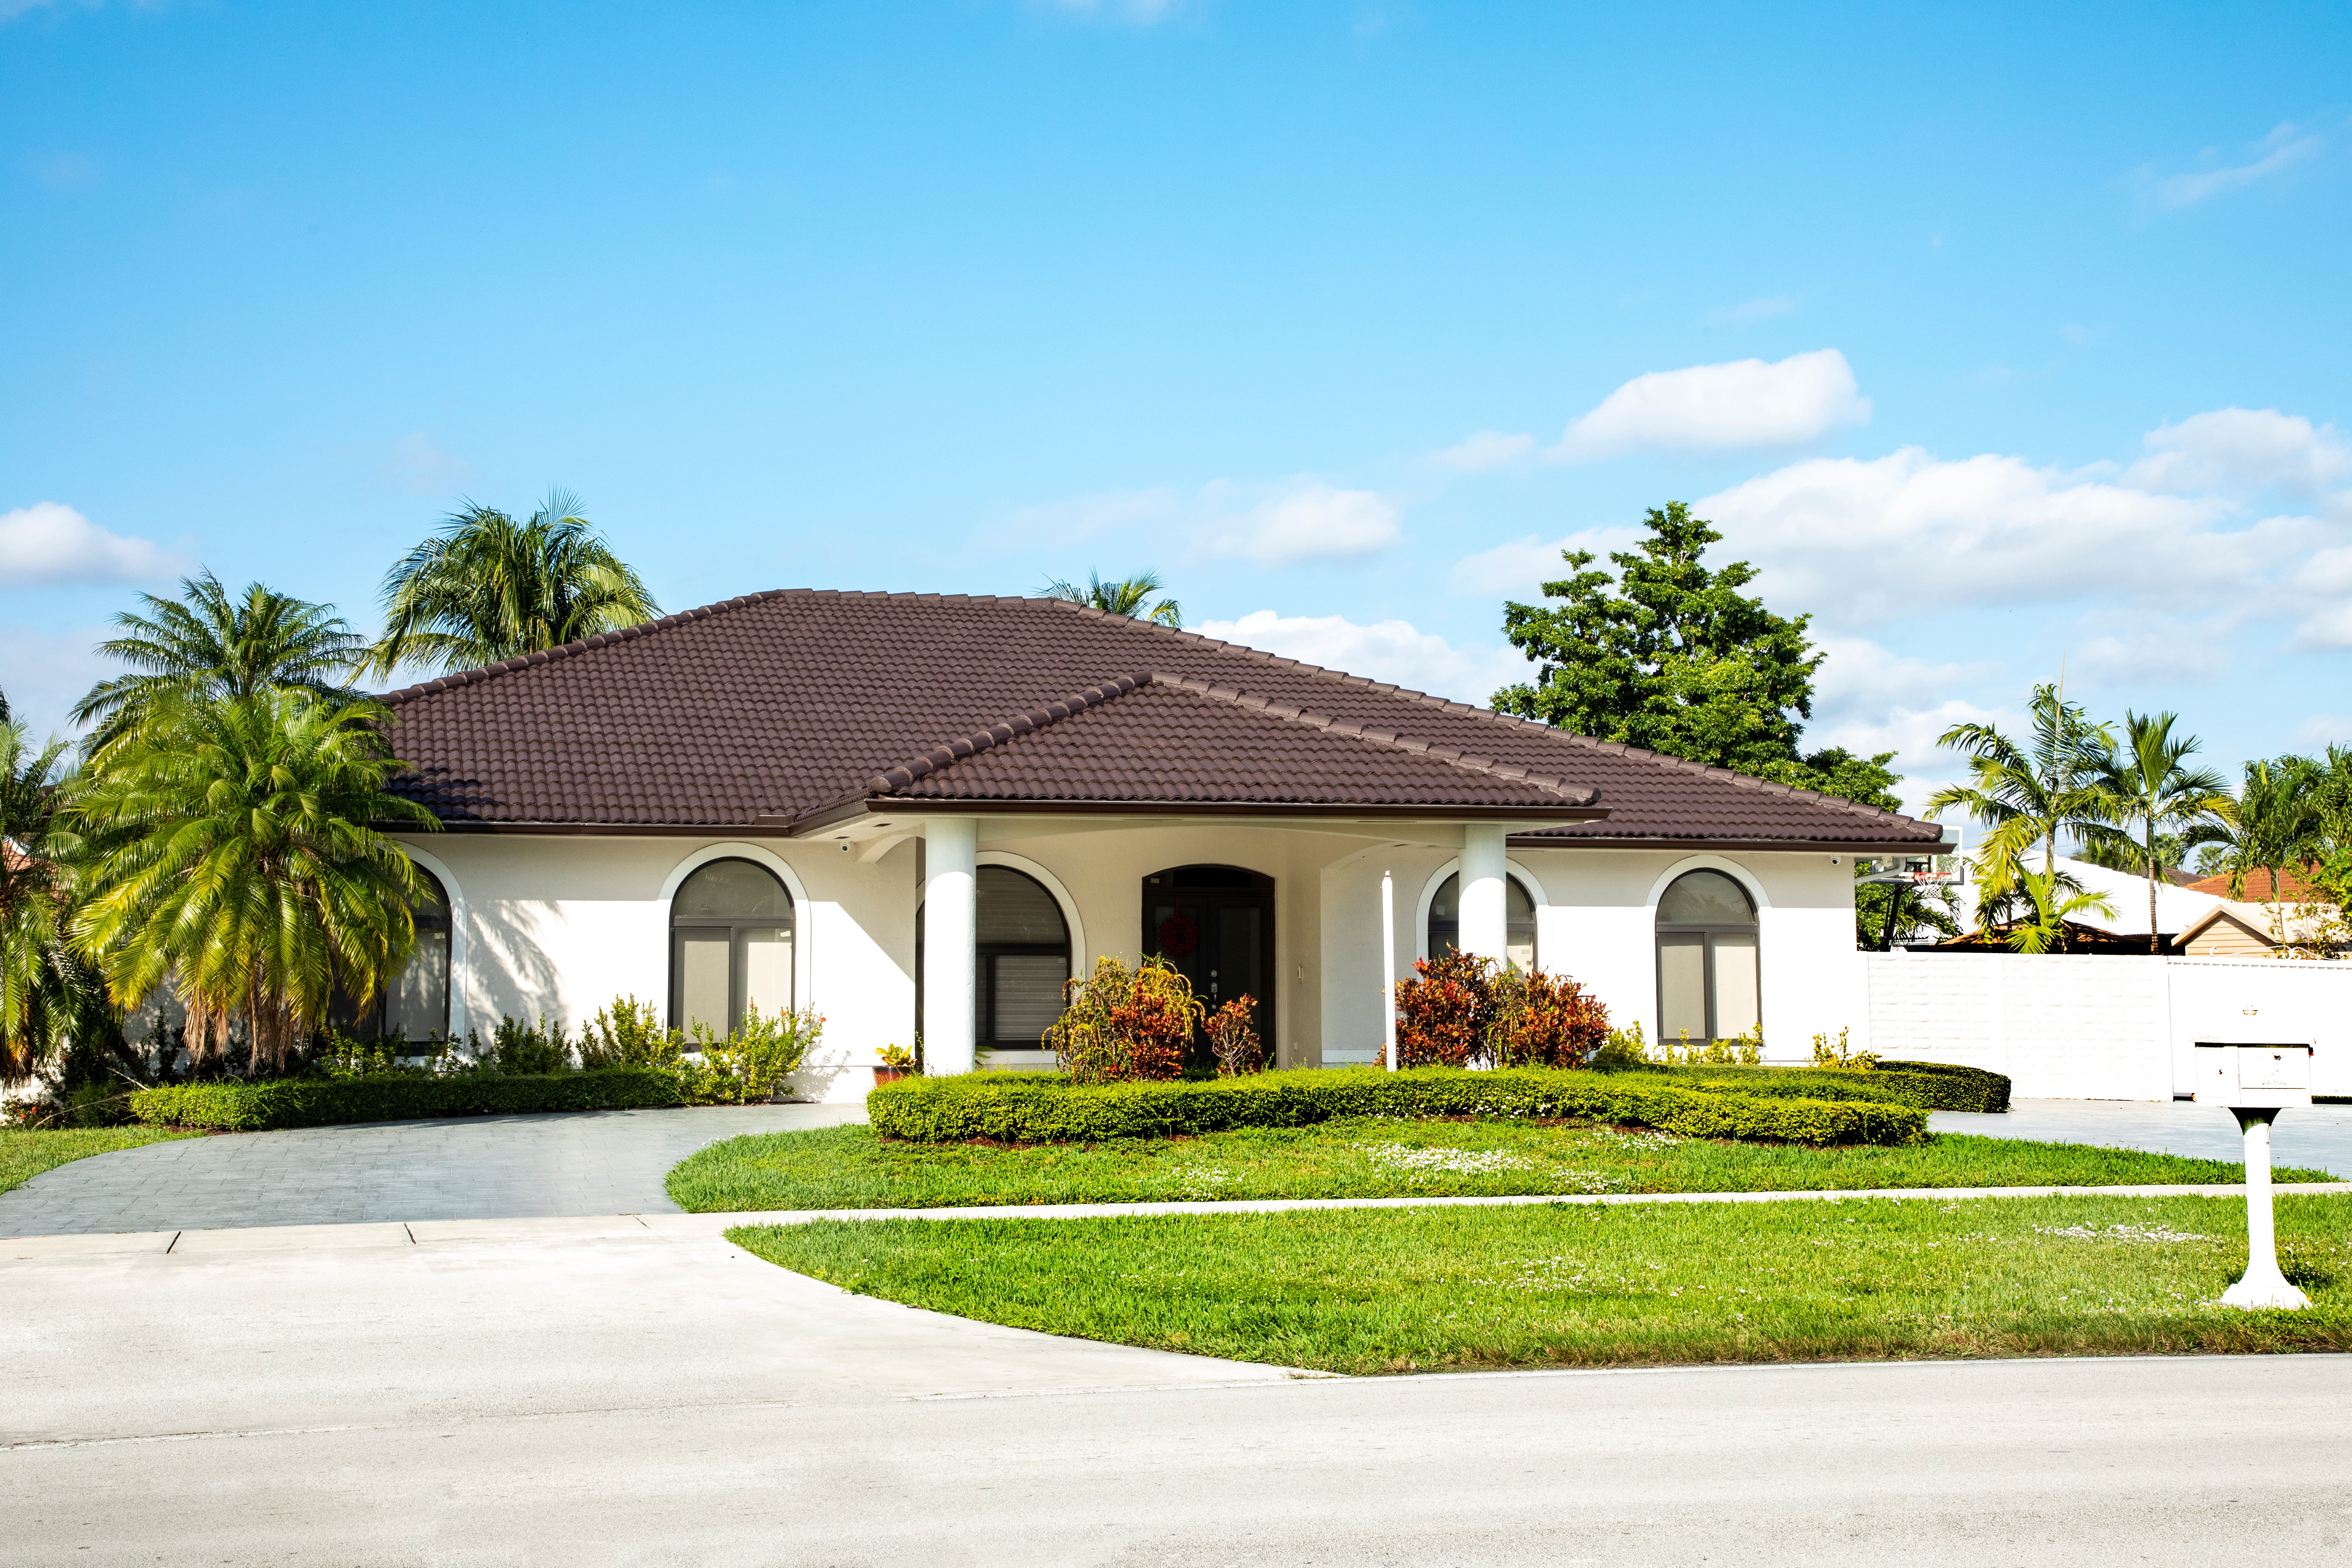 A one-story ranch home that may be eligible for the Florida homestead exemption